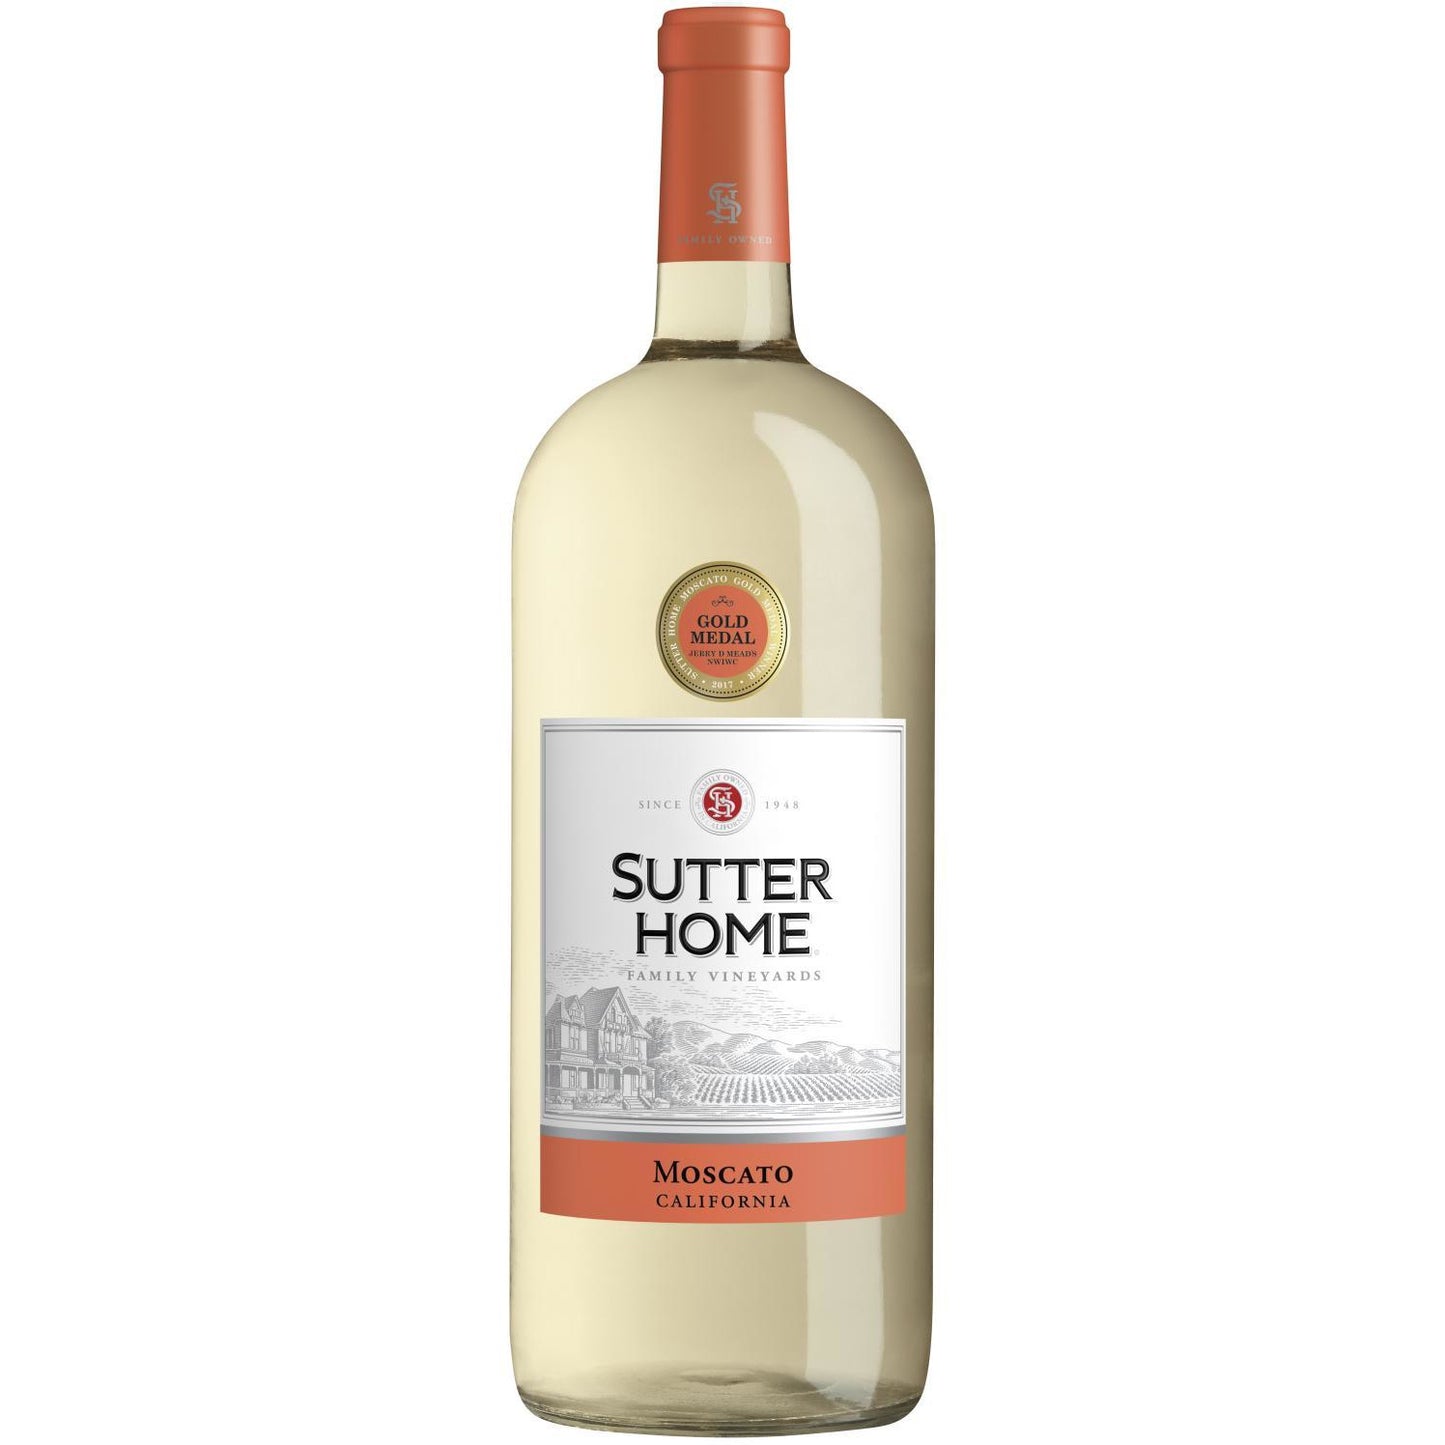 SUTTER HOME WHITE MOSCA 1.5LT